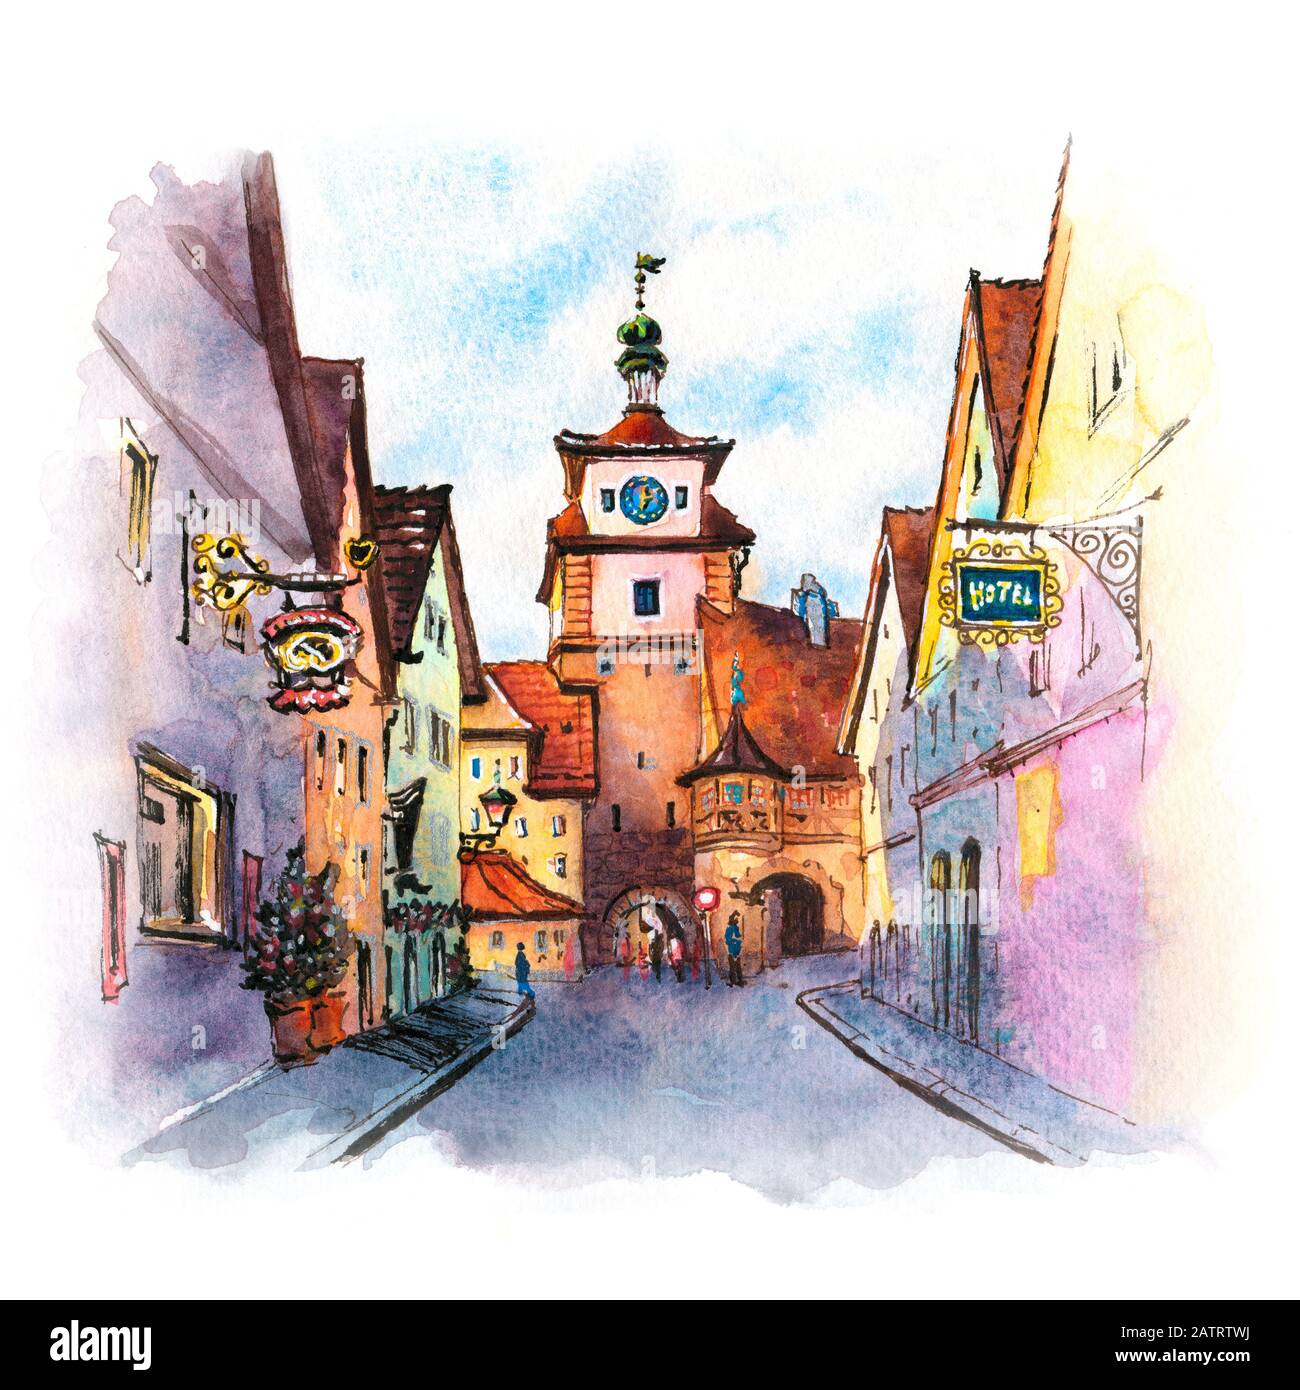 Watercolor sketch of White tower or Weisser Turm in medieval old town of Rothenburg ob der Tauber, Bavaria, part of Romantic Road through Germany Stock Photo